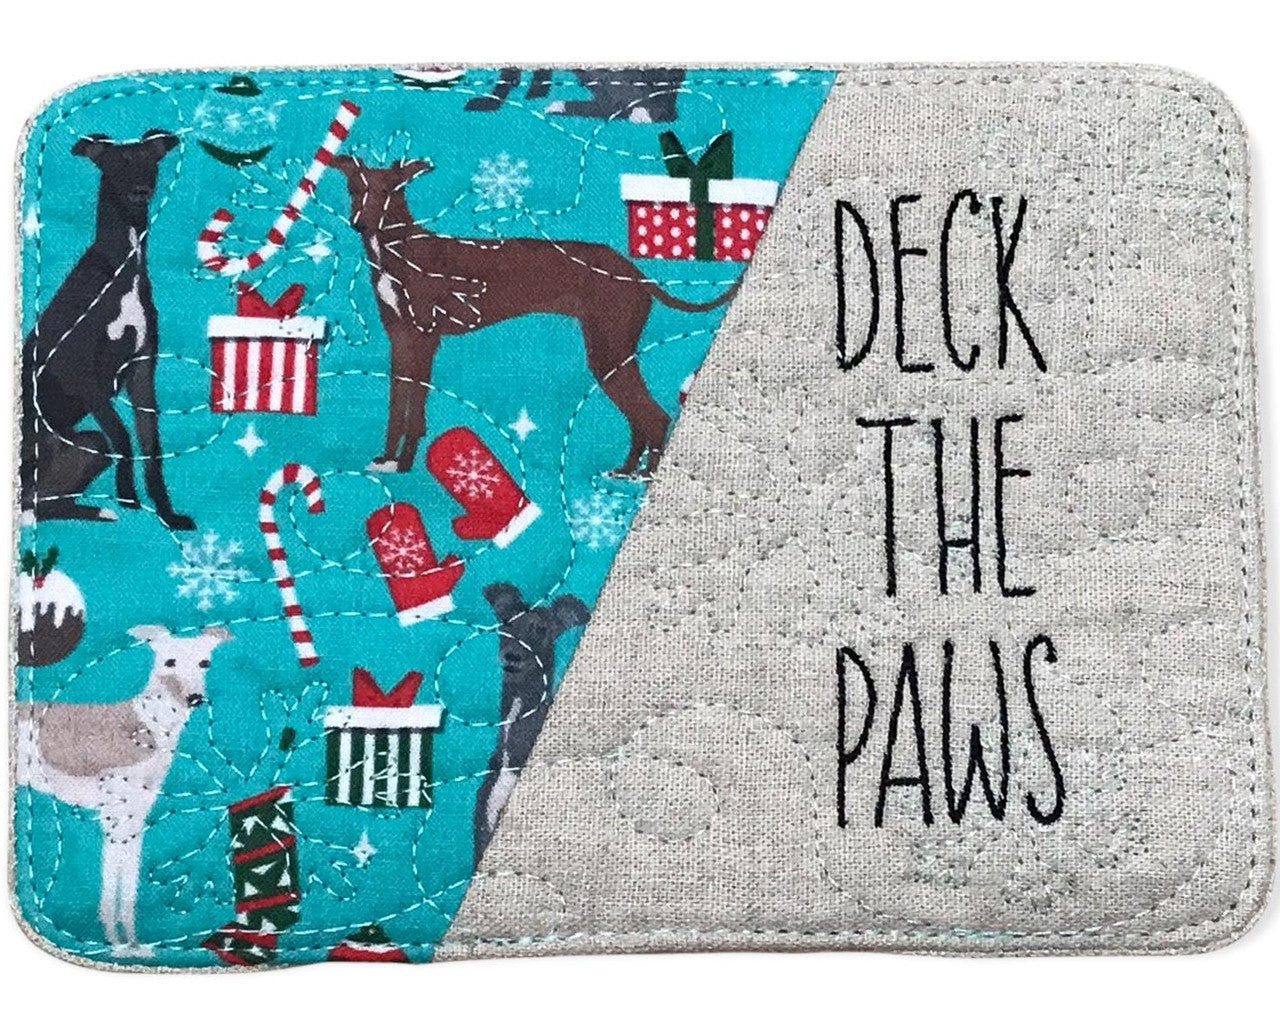 Mug Rug - Deck The Paws Italian Greyhounds Turquoise / Natural Quilted Snowflakes